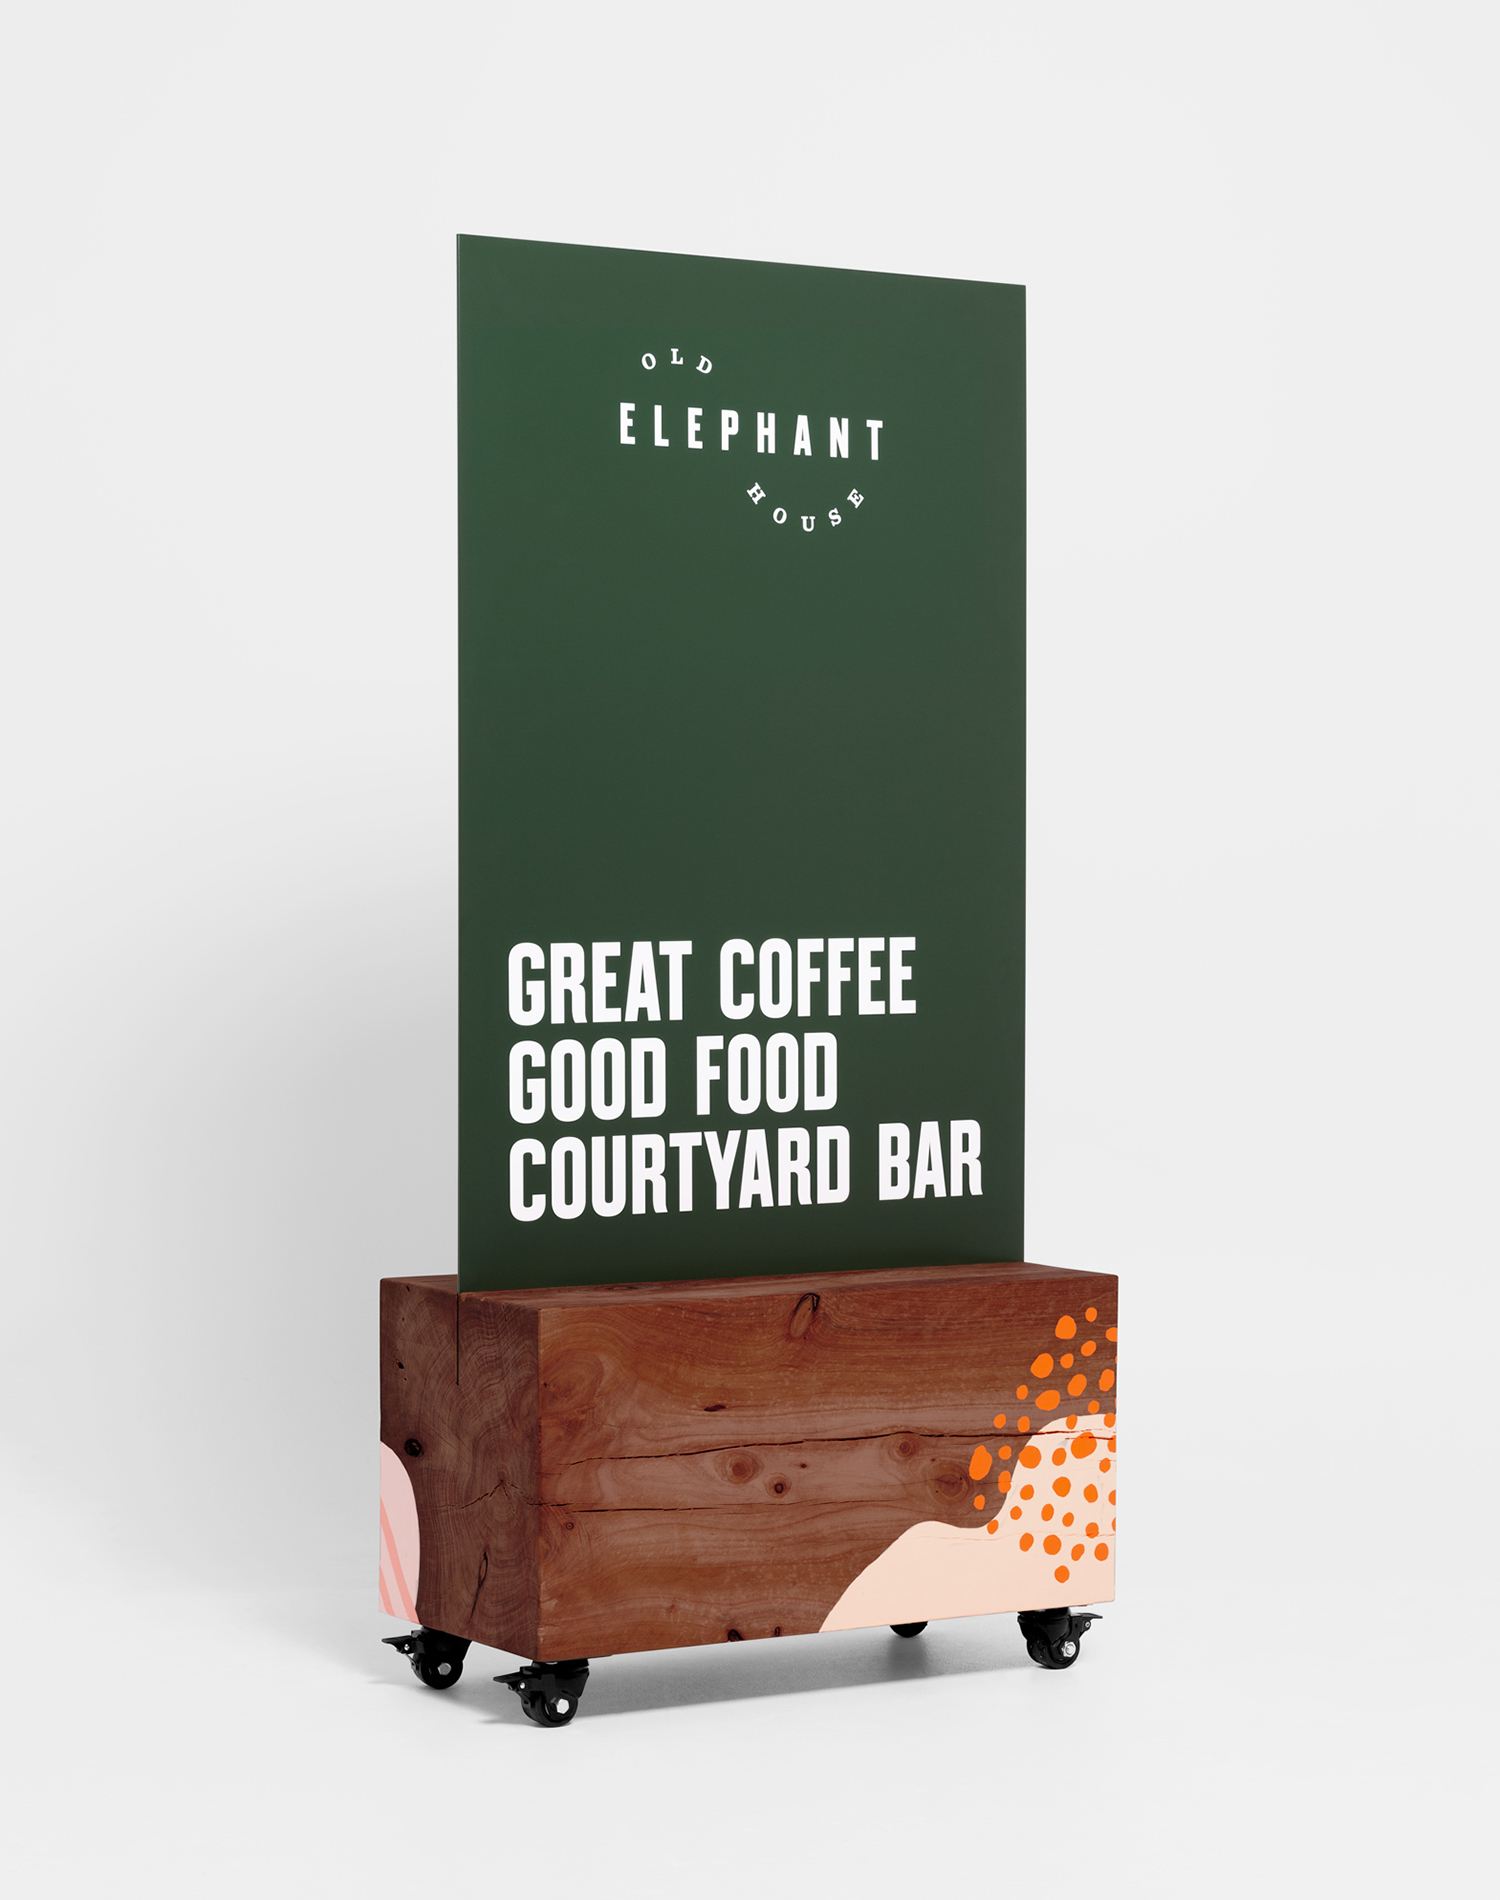 Visual identity design by Studio South for brasserie and courtyard bar Old Elephant House at Auckland Zoo